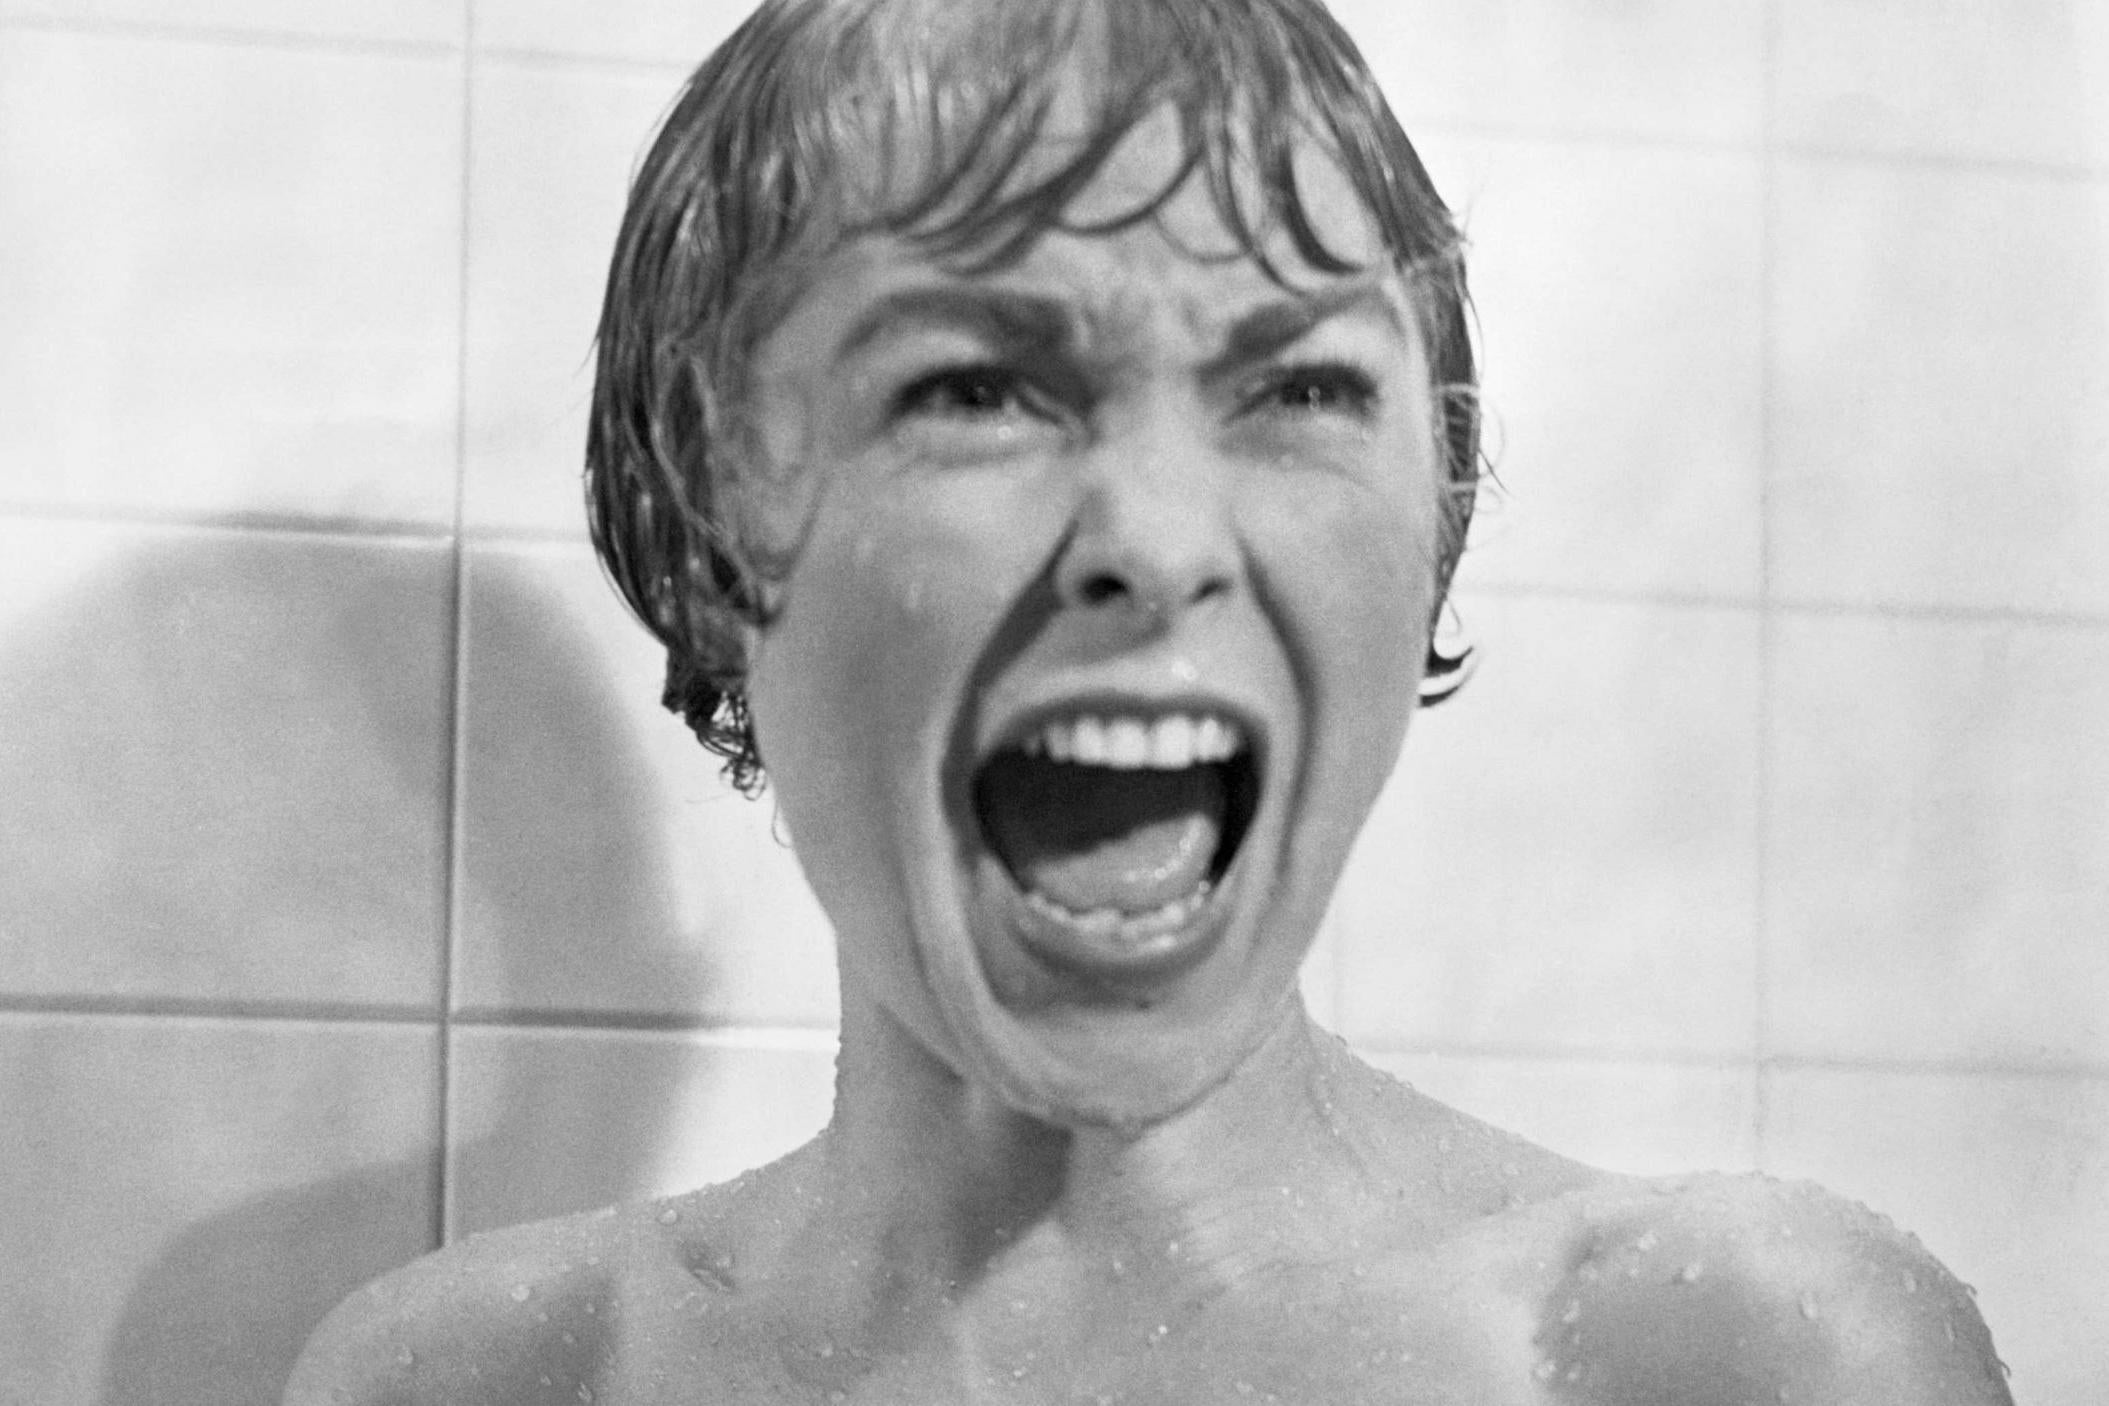 Motel check-out: Janet Leigh’s Marion makes a brutally unexpected exit